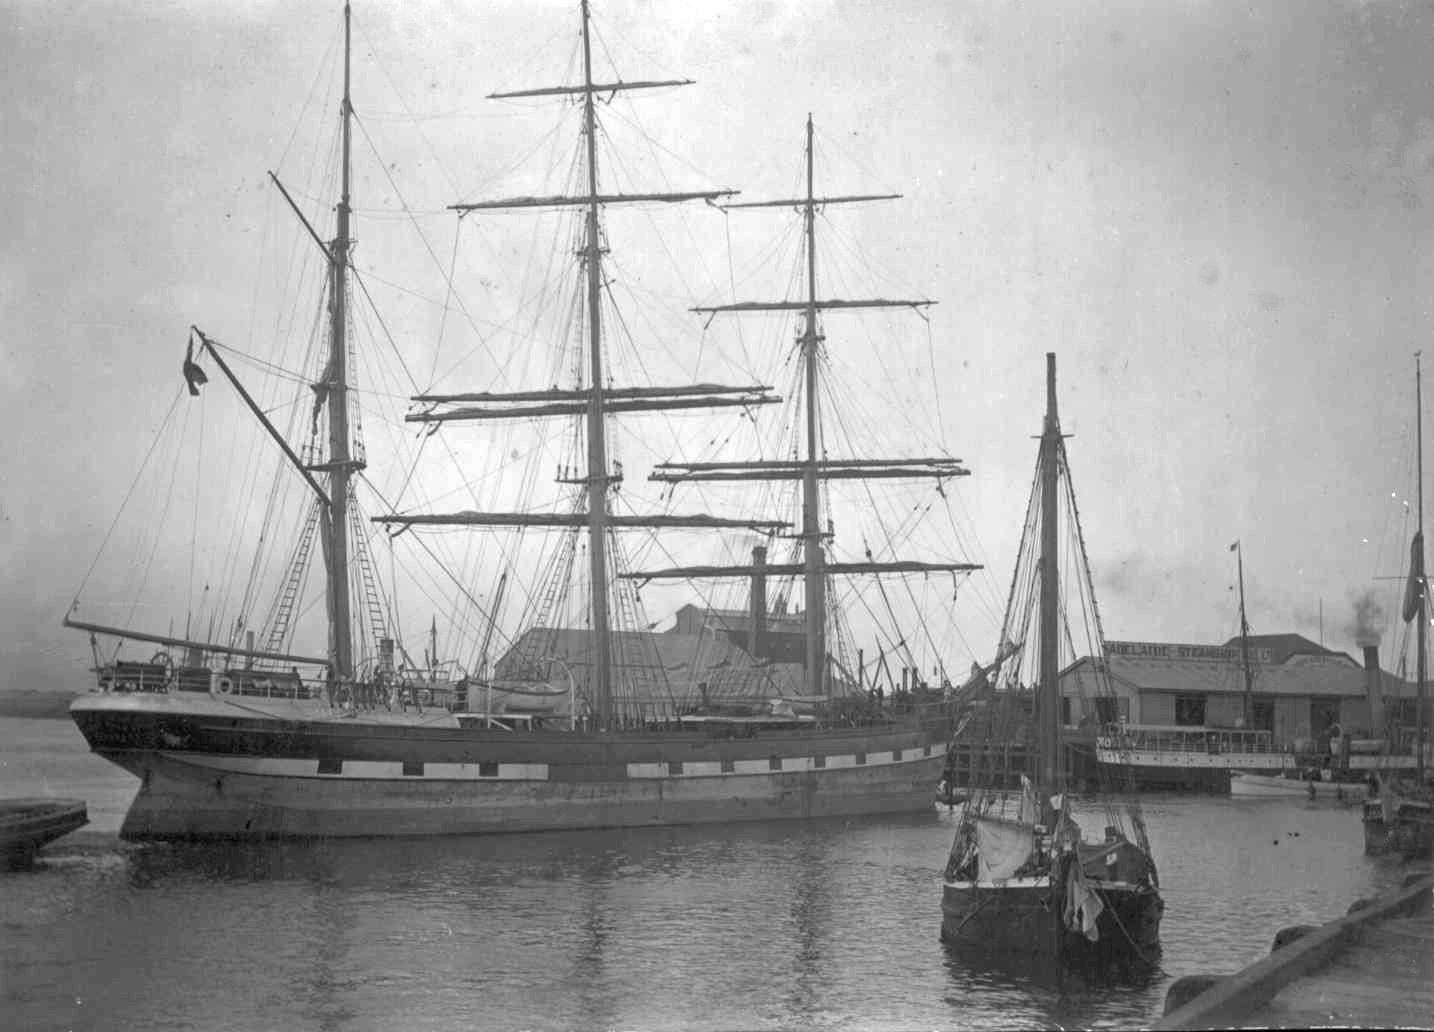 Iron Barque "Loch Ryan", built in 1877.
This image of vessel taken in Port Adelaide